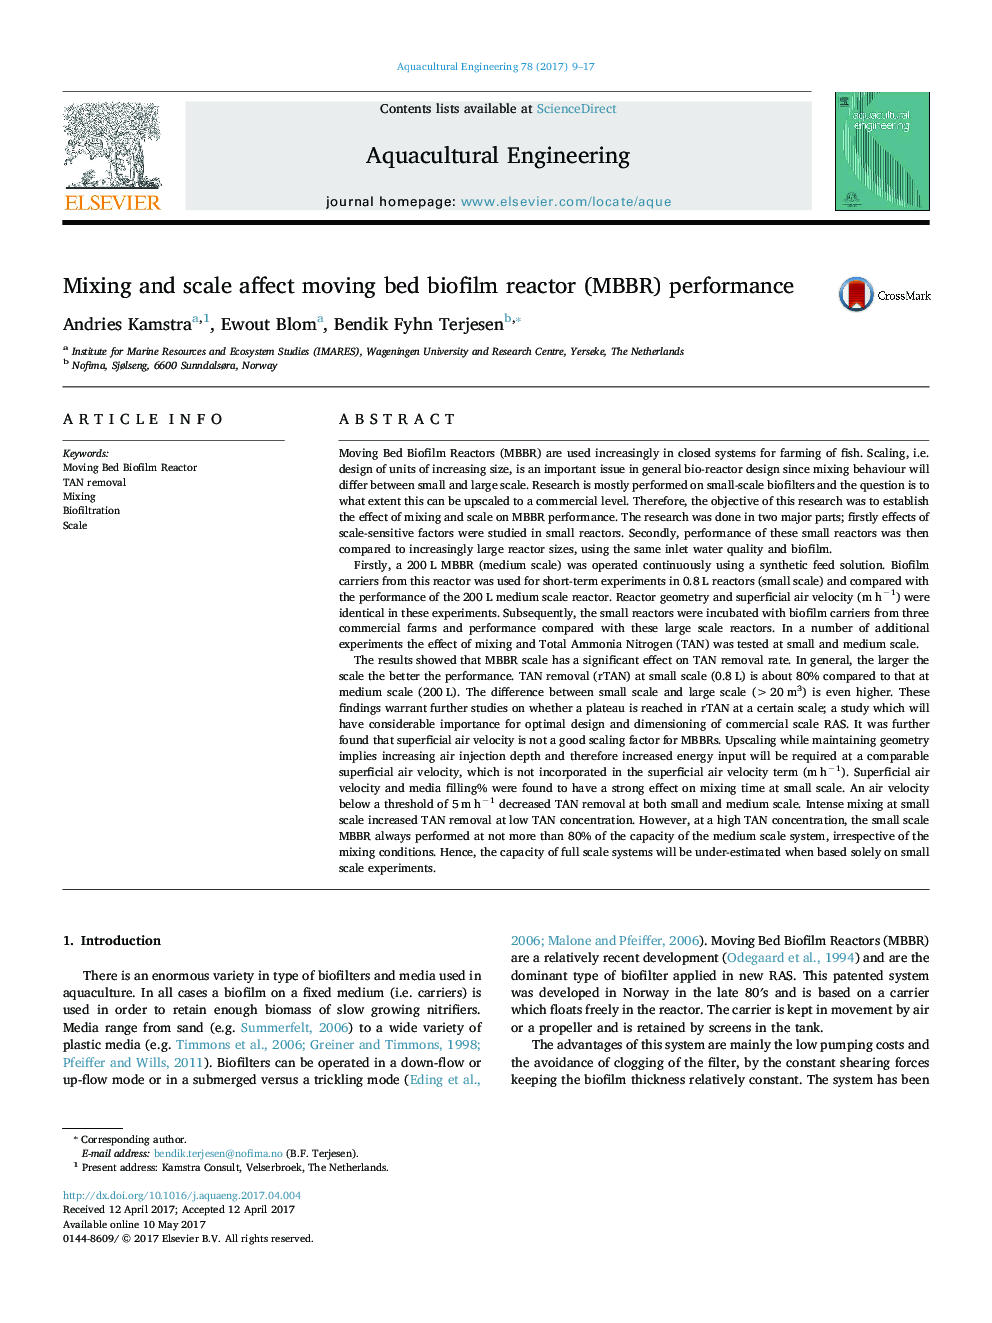 Mixing and scale affect moving bed biofilm reactor (MBBR) performance